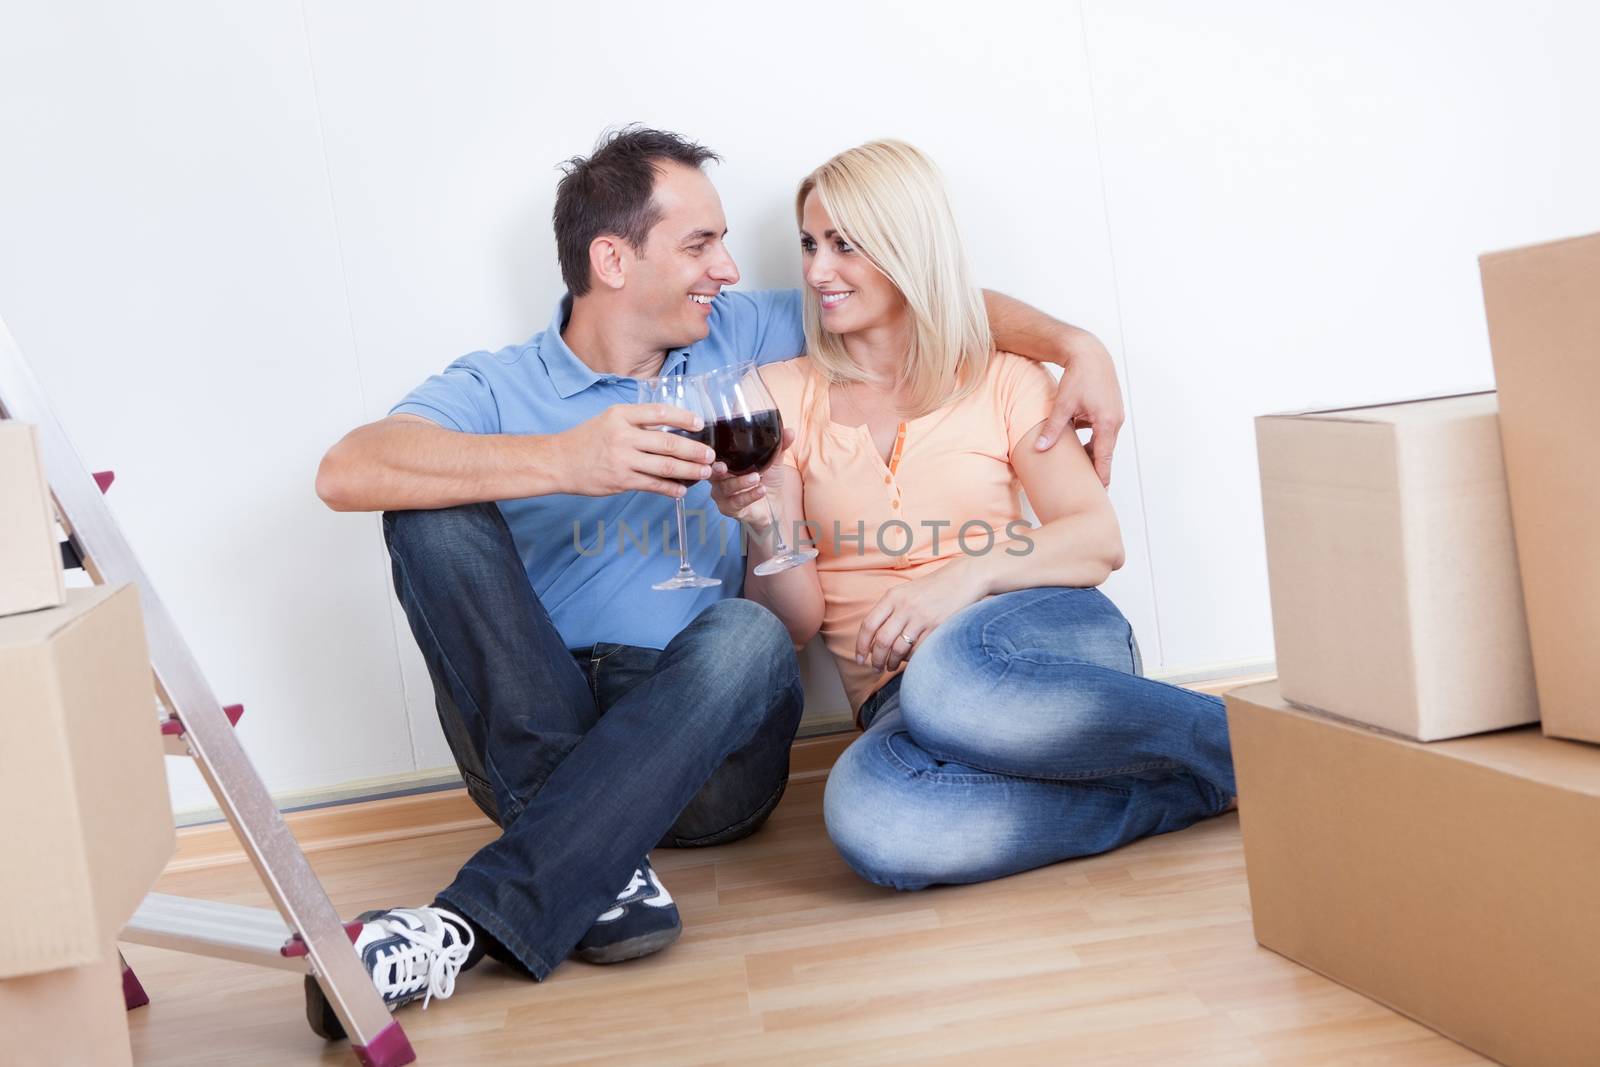 Couple Sitting Between Cardboard Boxes And  Holding Wine Glass, Indoors